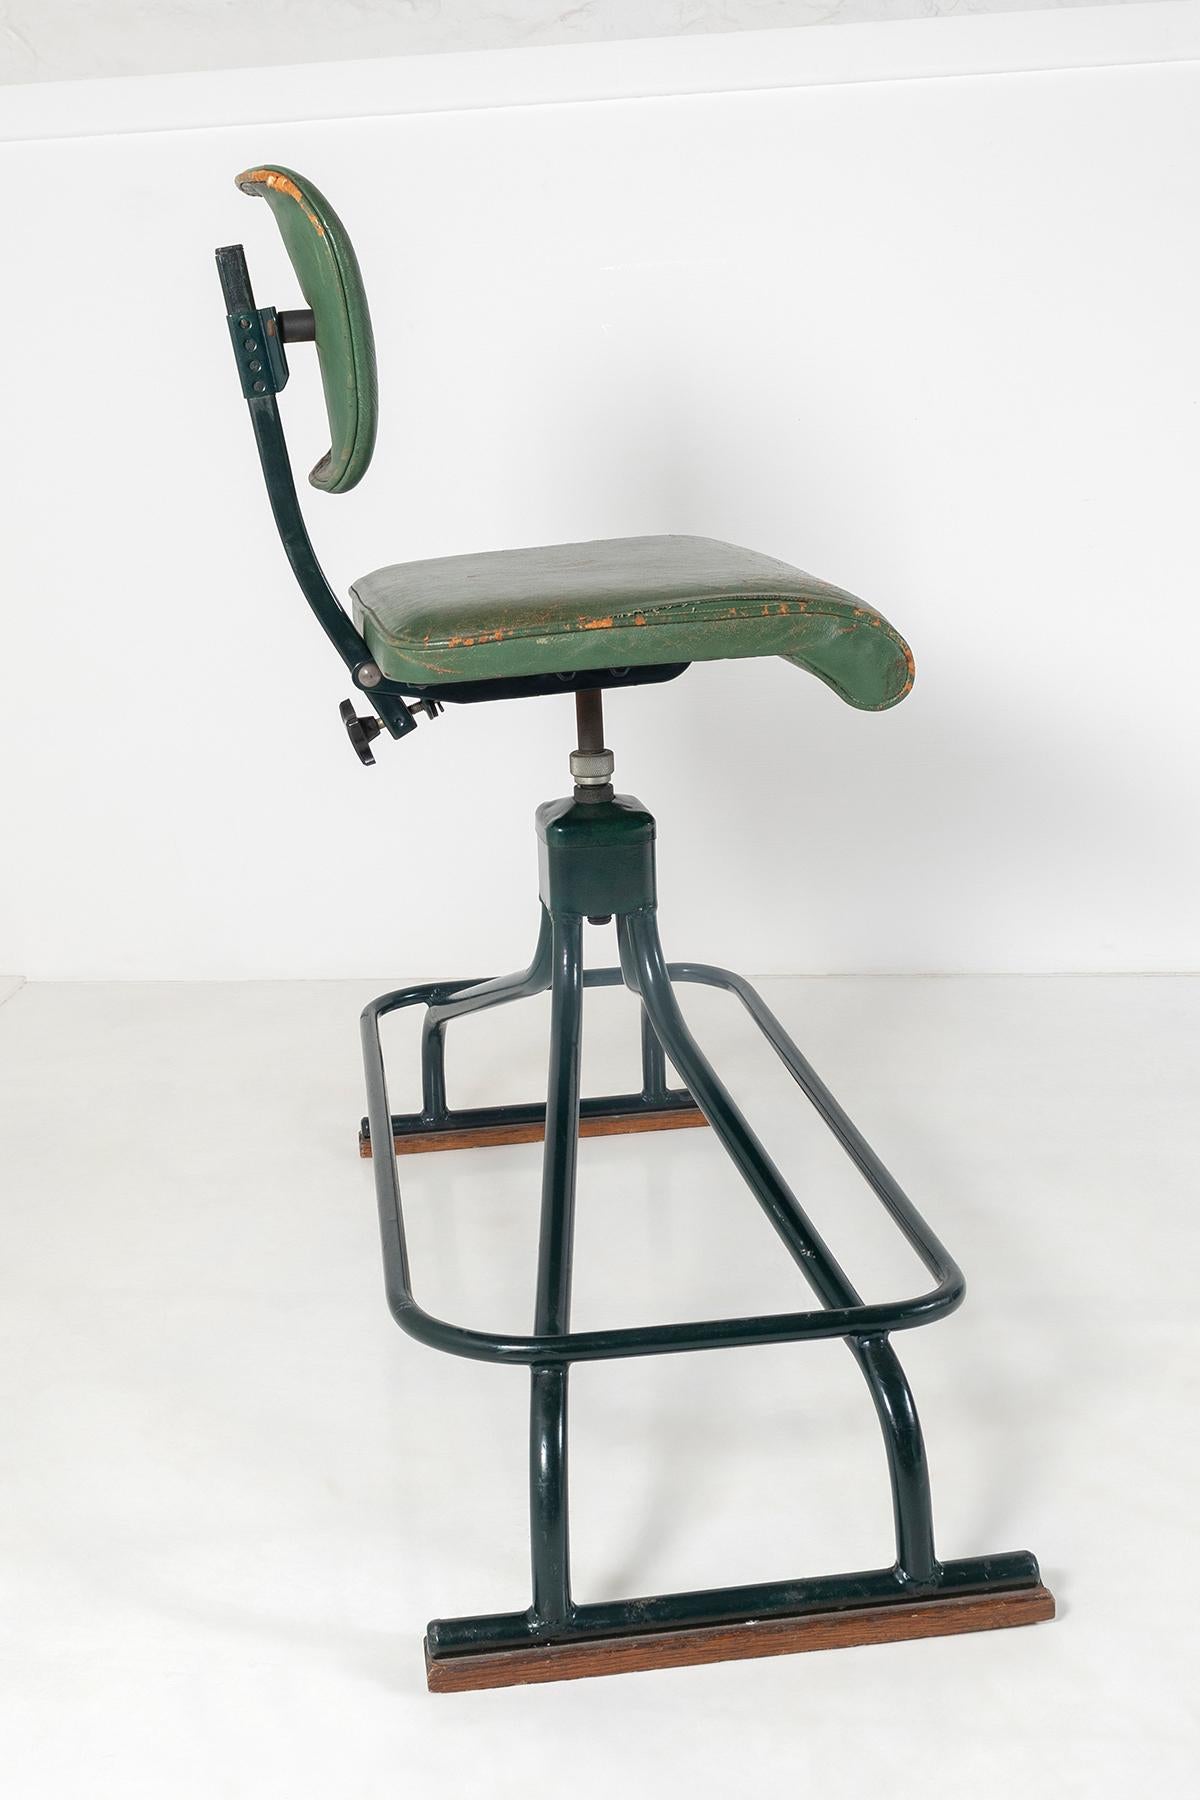 British Rare 1950 Industrial Factory Swivel Stool by Evertaut Musician Guitarist Stool For Sale